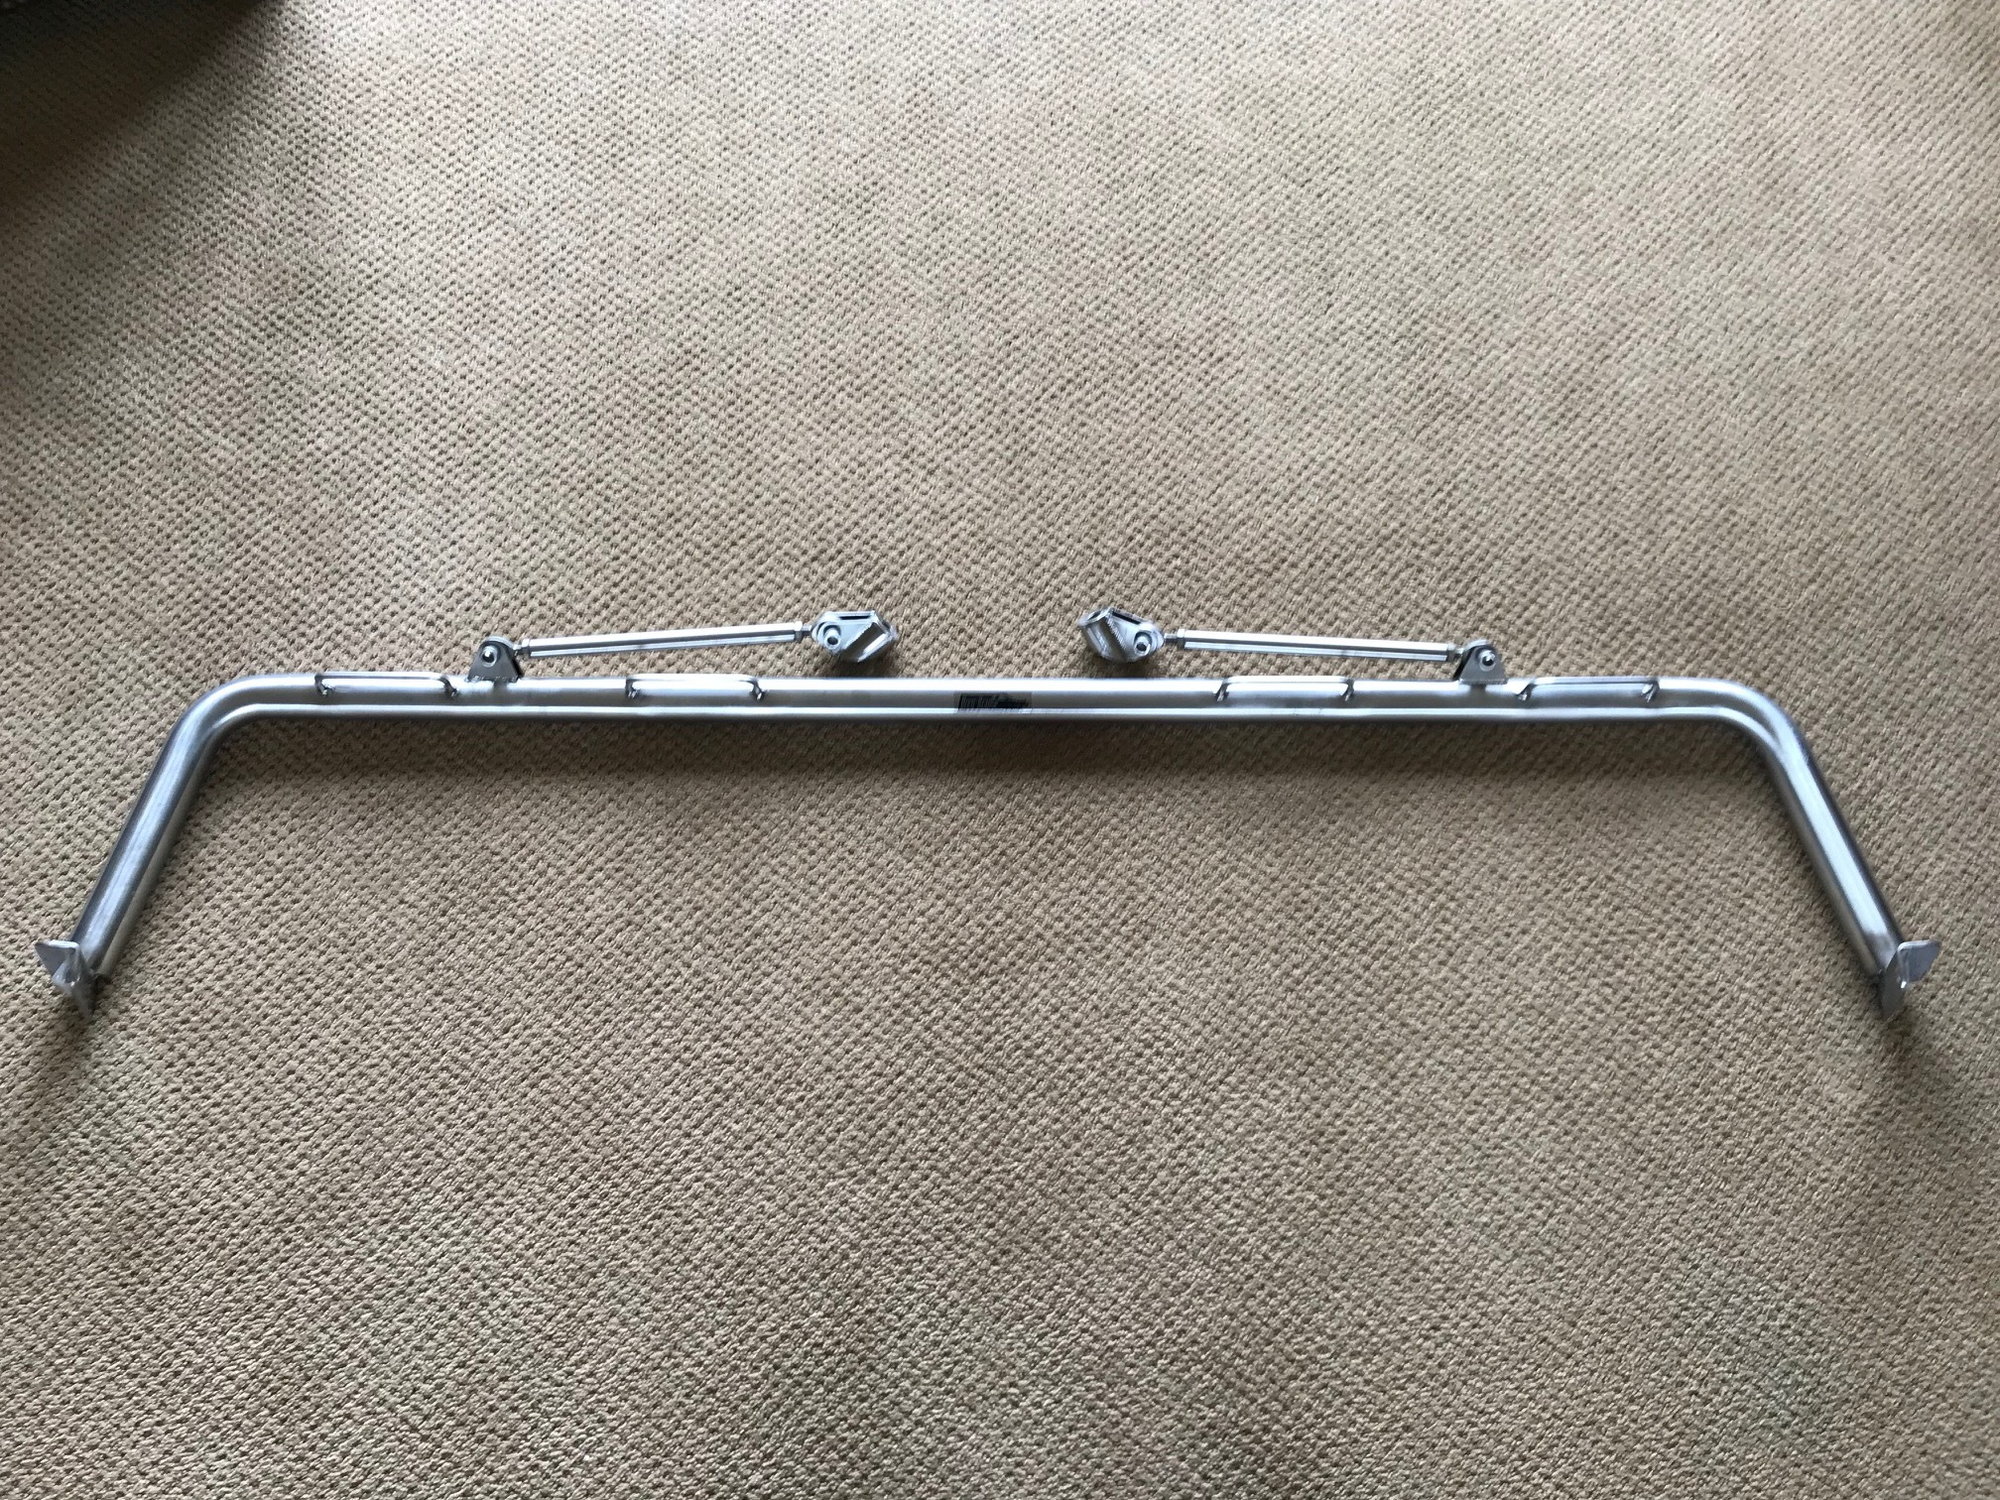 Interior/Upholstery - Brey Krause Harness Guide Bar - 924 944 968 - Used - 1983 to 1995 Porsche 944 - Minnetonka, MN 55345, United States